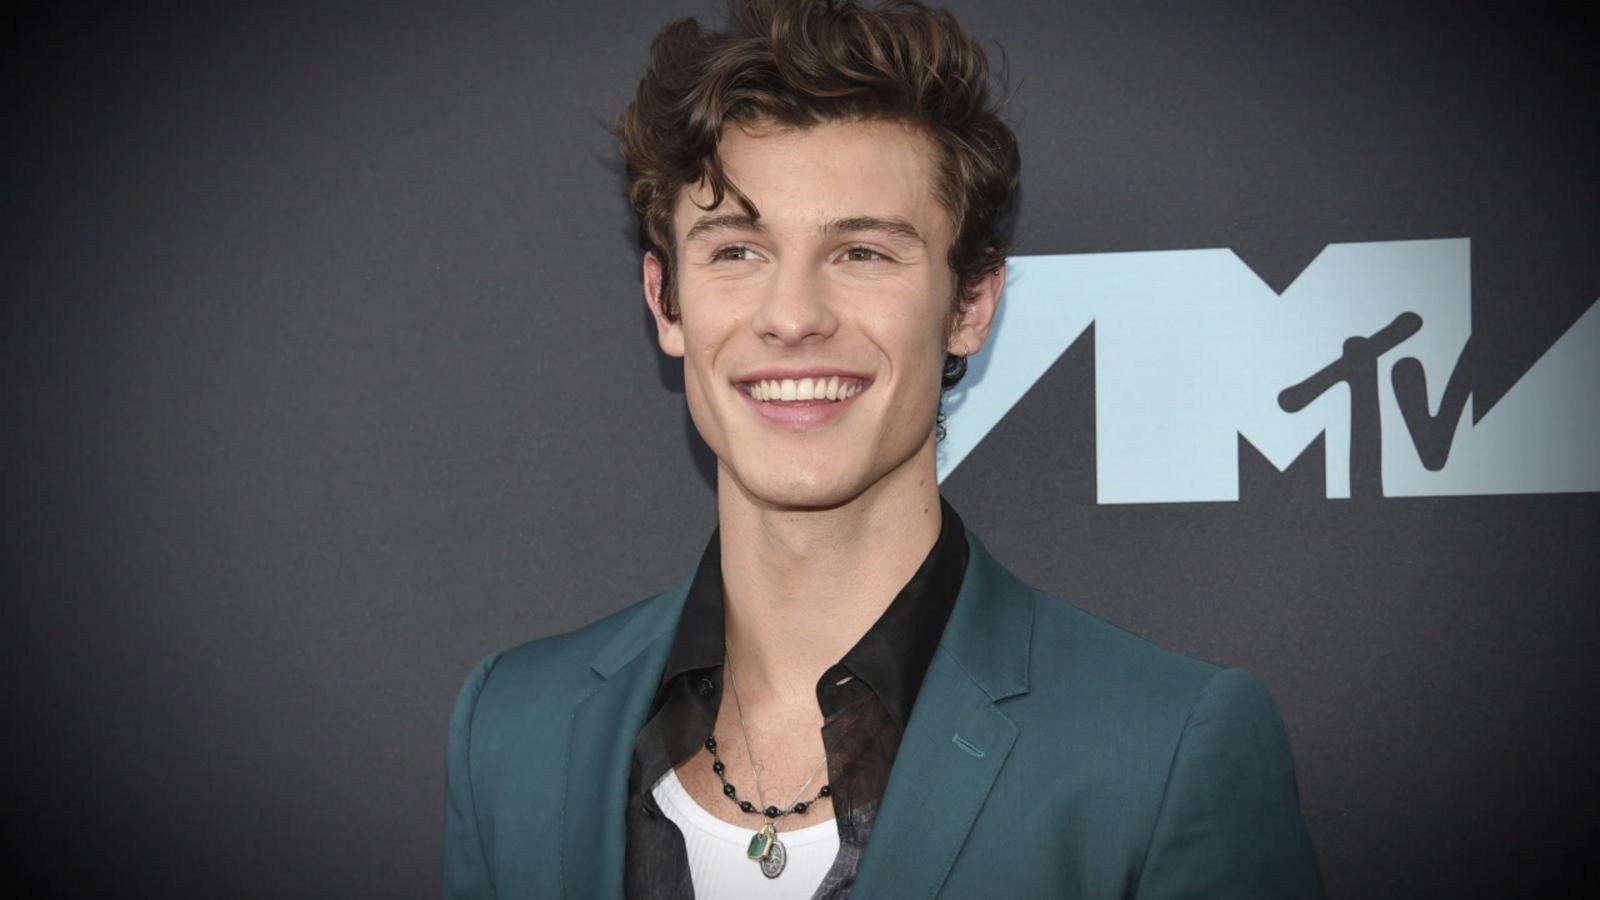 Shawn Mendes Cancels Wonder World Tour To Focus On Mental Health